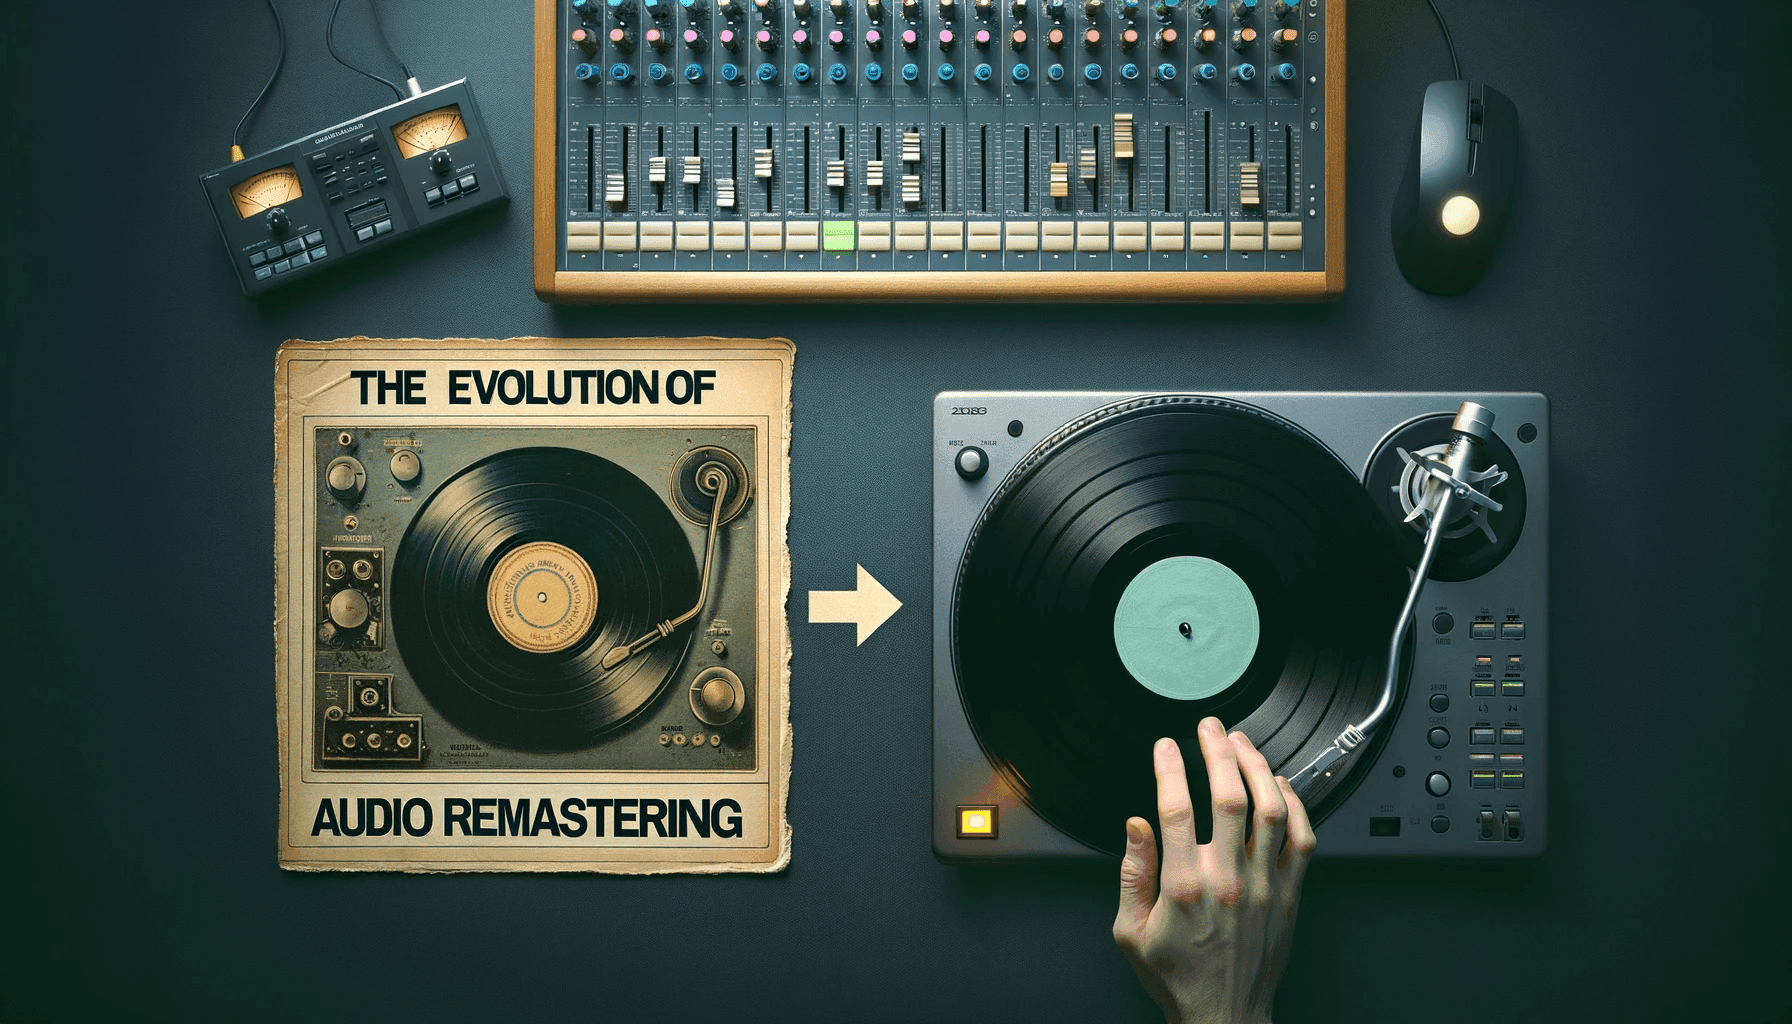 Photo montage showcasing a vintage vinyl record on the left and a digital audio workstation on the right.